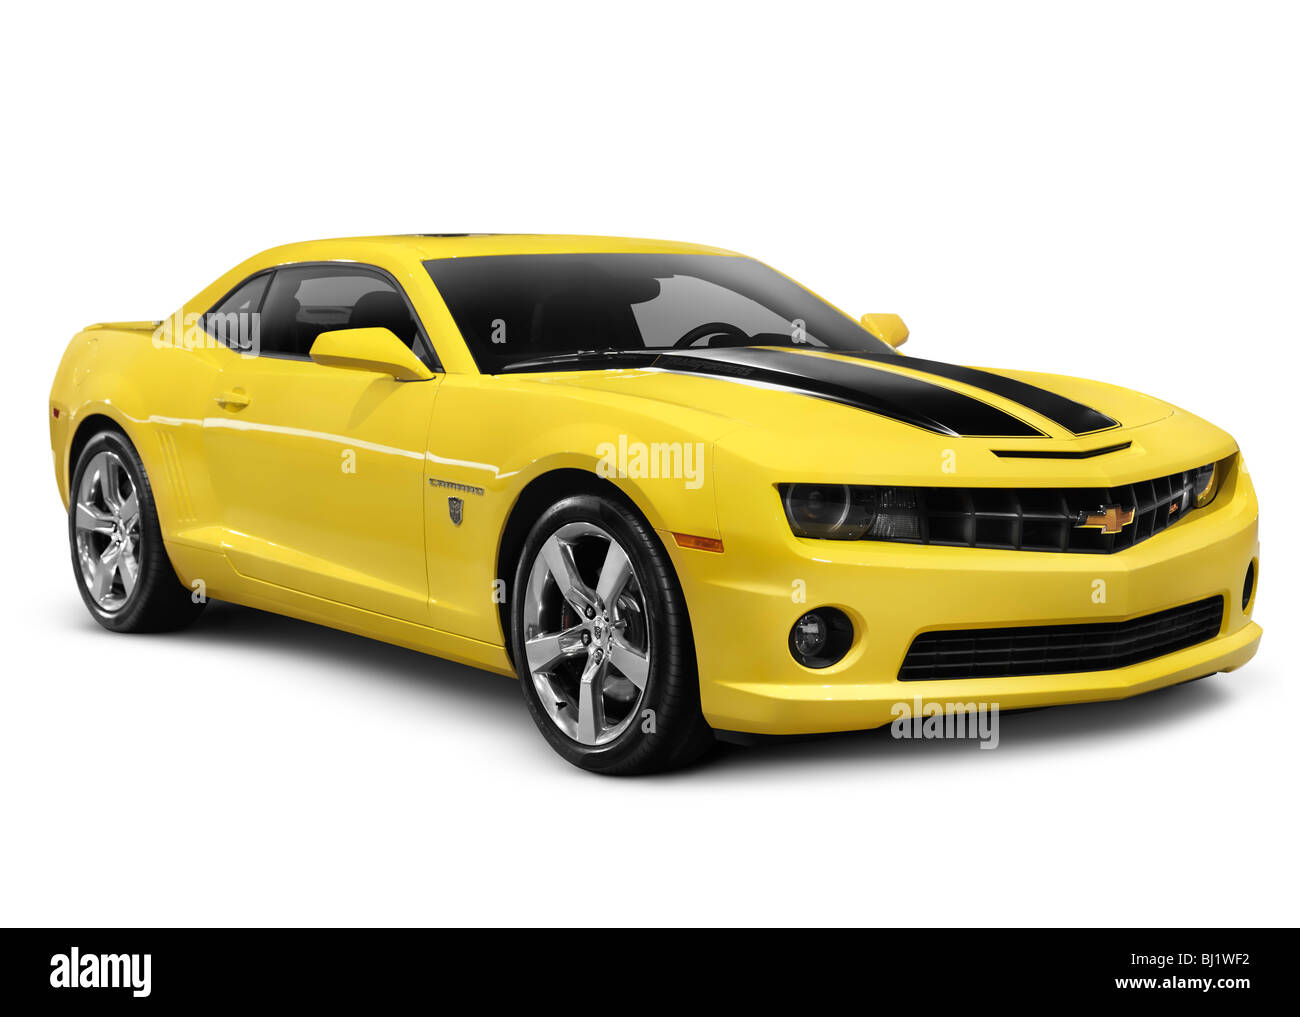 License and prints at MaximImages.com - Yellow 2010 Chevrolet Camaro 2SS Coupe sports car isolated on white background with clipping path Stock Photo